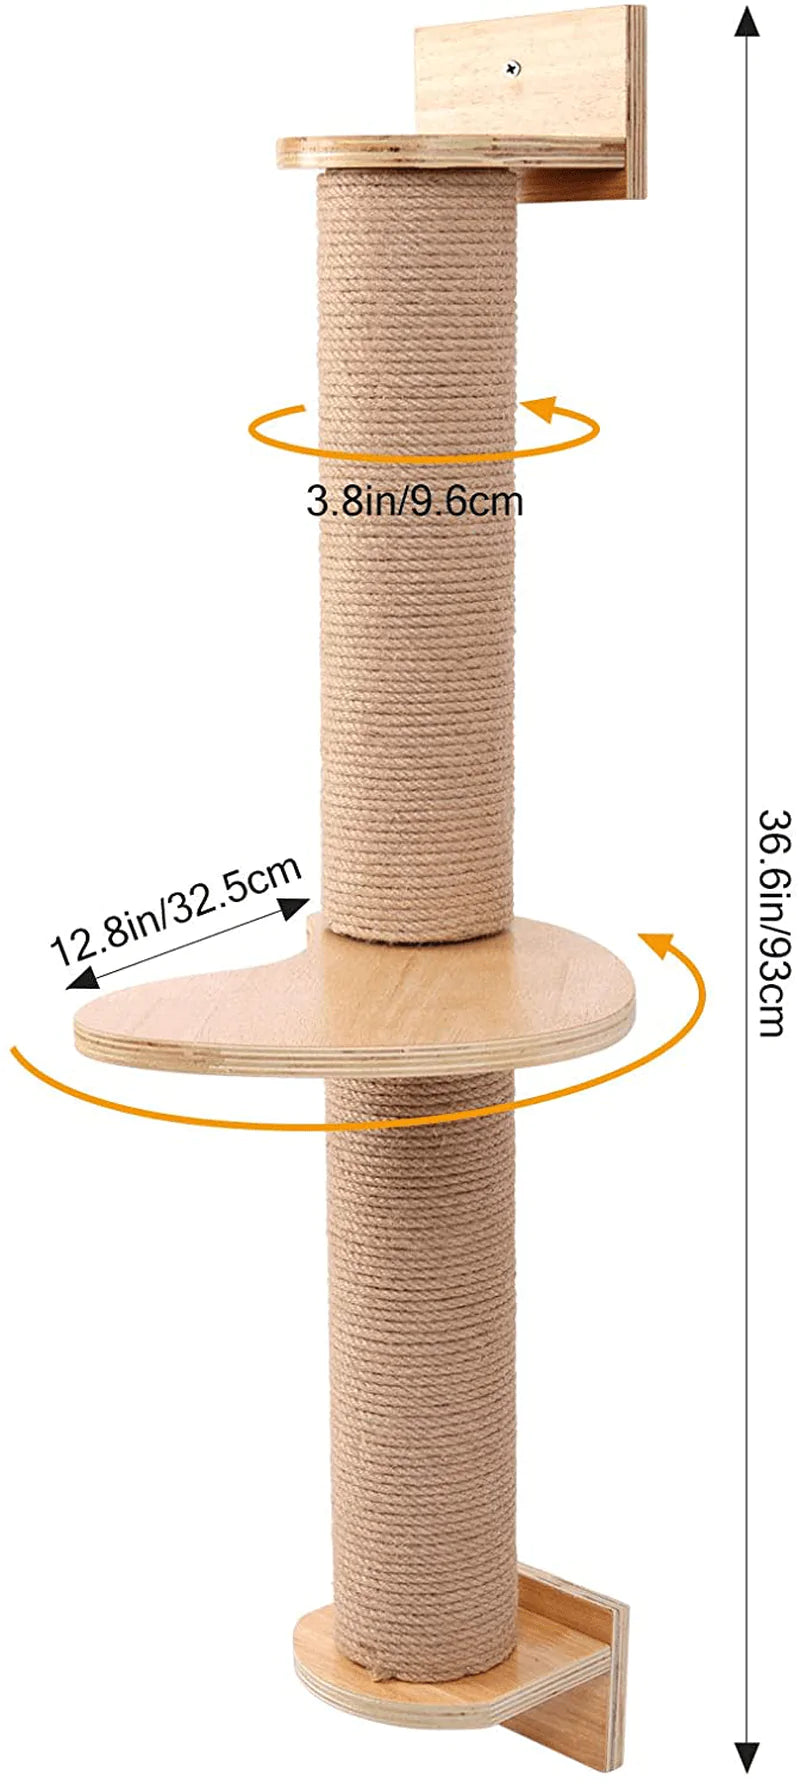 Odoland Cat Activity Tree with Scratching Posts - Wall Mounted Cat Scratching Post Cat Shelves with Solid Wood Steps - Cage Mounted Cat Jute Scratcher Hammock for Indoor